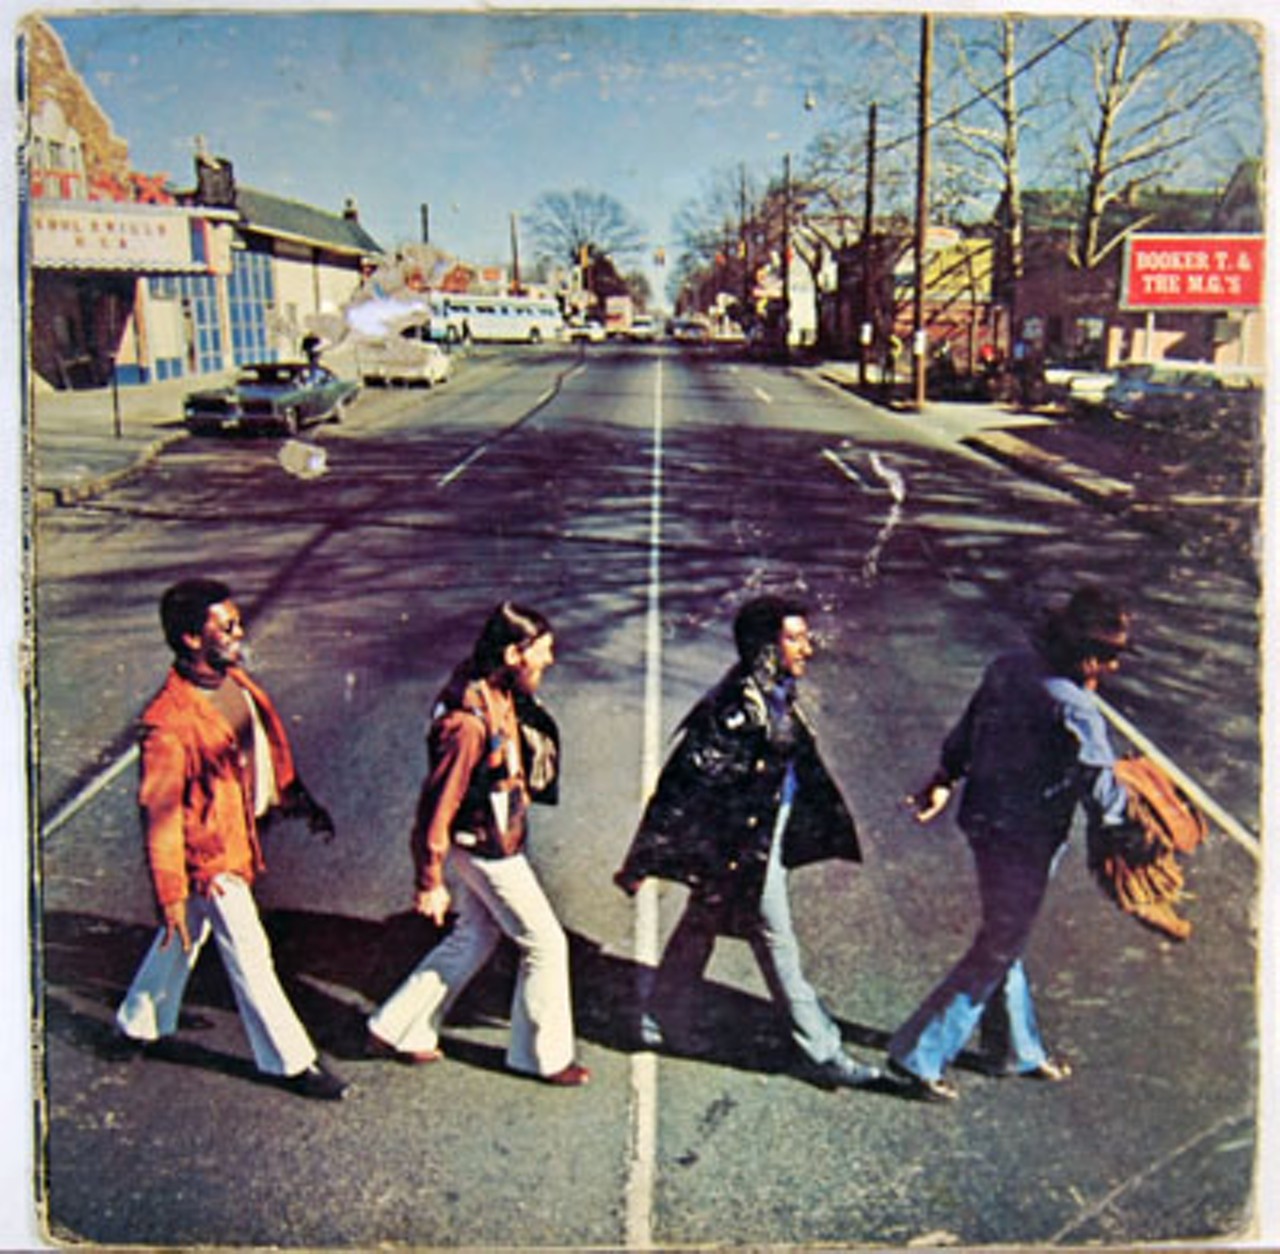 Booker T and the M.G.'s tribute to the Beatles' Abbey Road. Photographed on a Memphis street.Read "Voices Carry: Shirley Brown, the forgotten soul sister, sings on," by Roy Kasten.